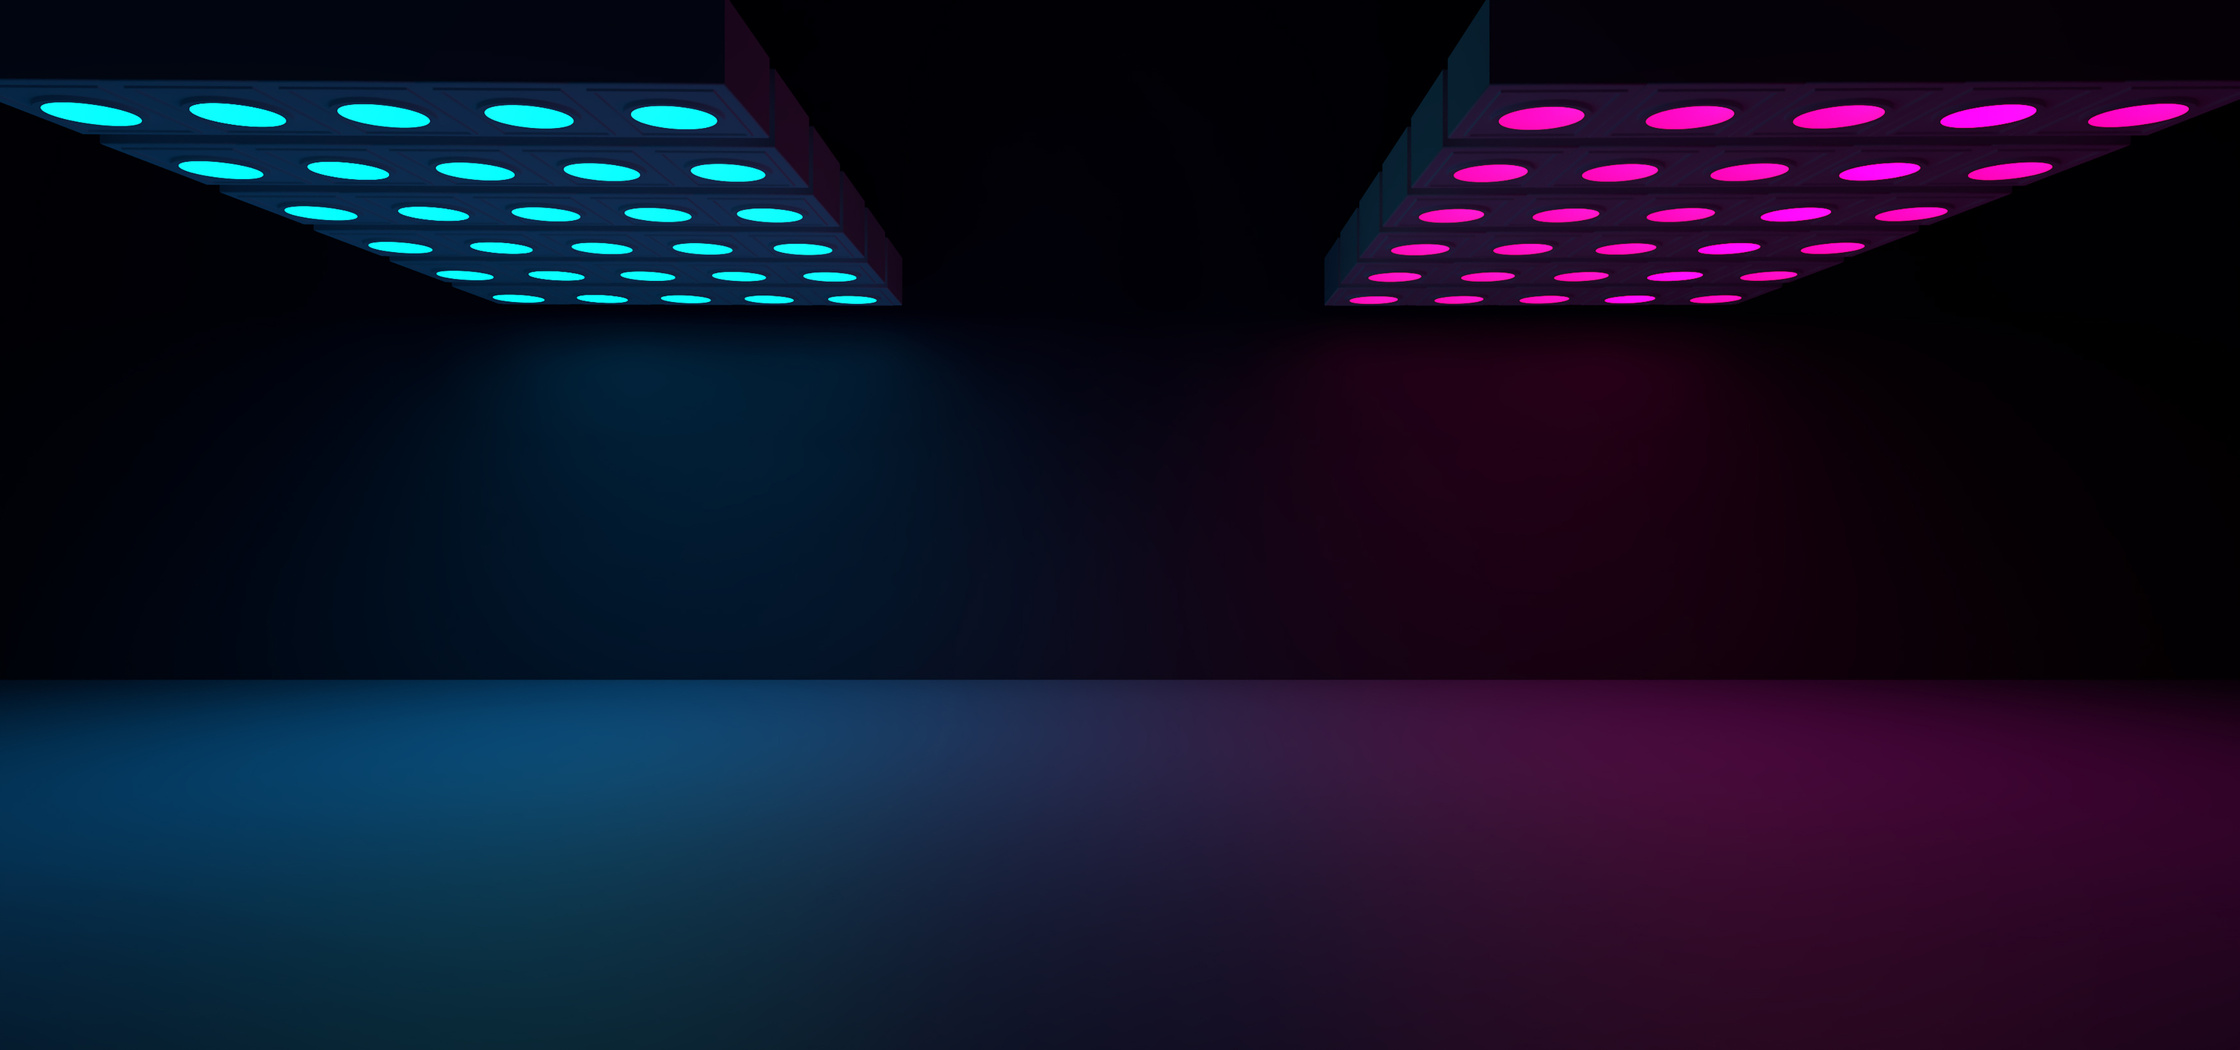 Abstract neon light floating on podium cyberpunk concept